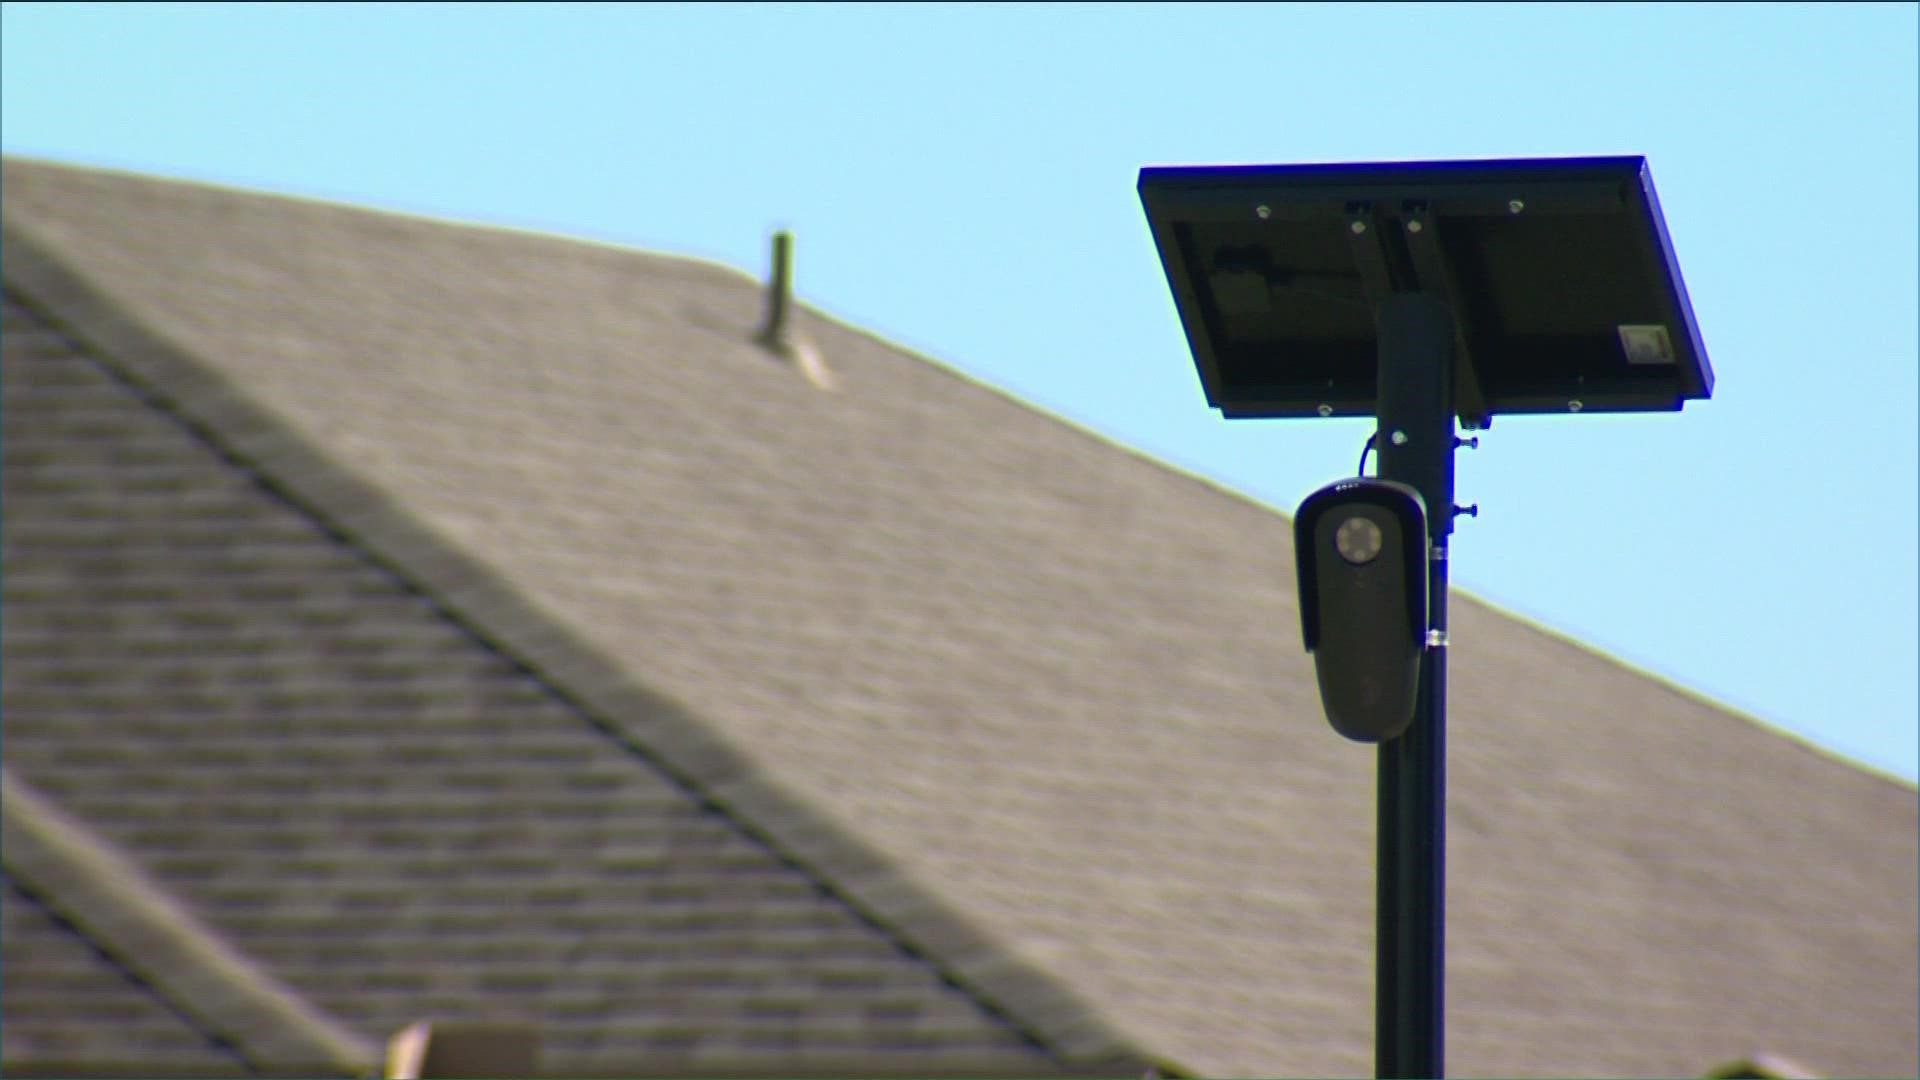 According to Community Impact, five more cameras will be installed around the city as permits are obtained.